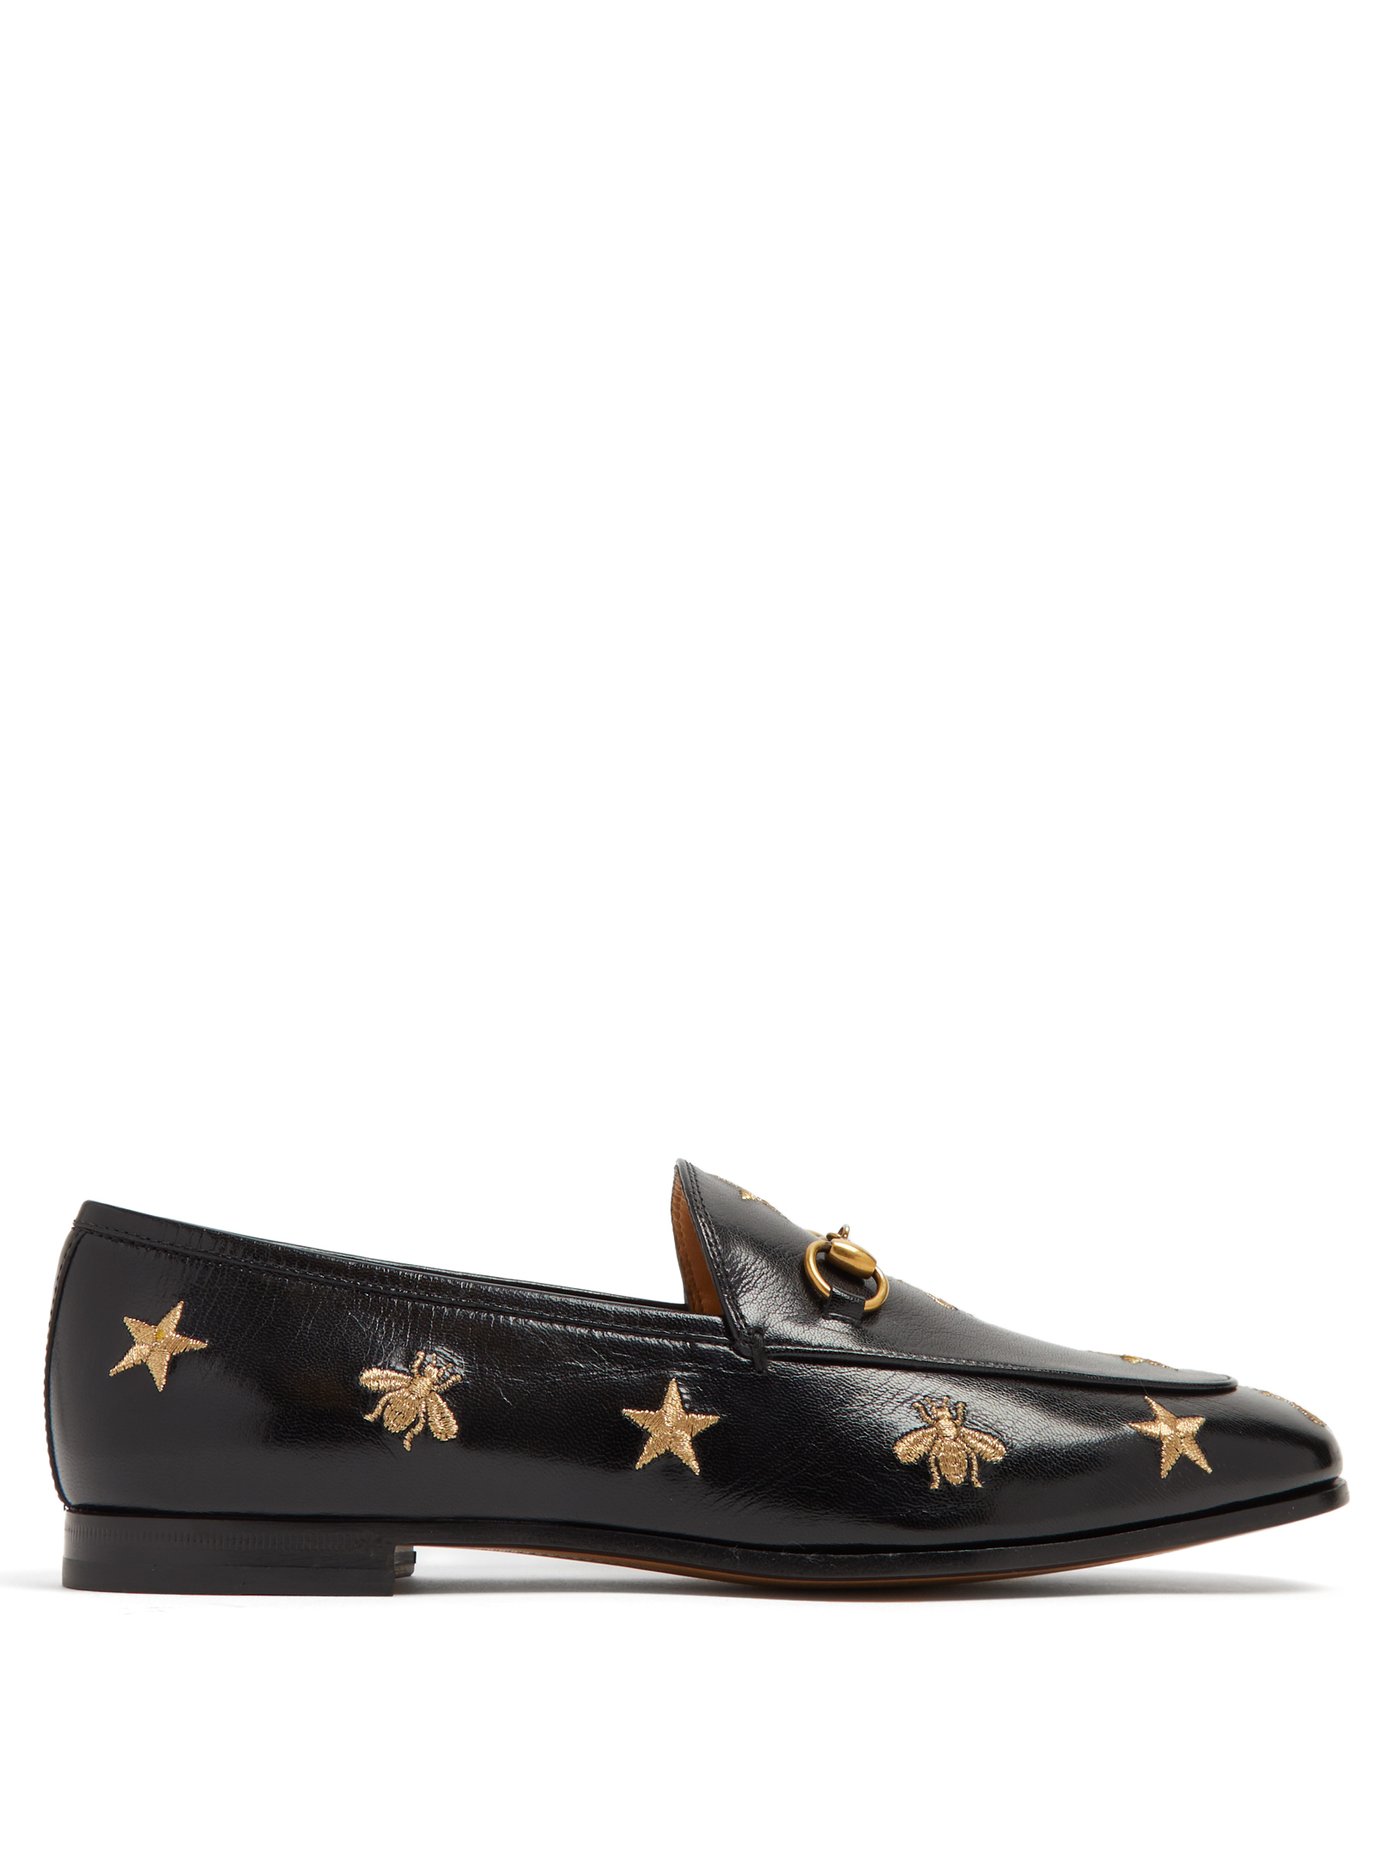 Jordaan embroidered leather loafers 